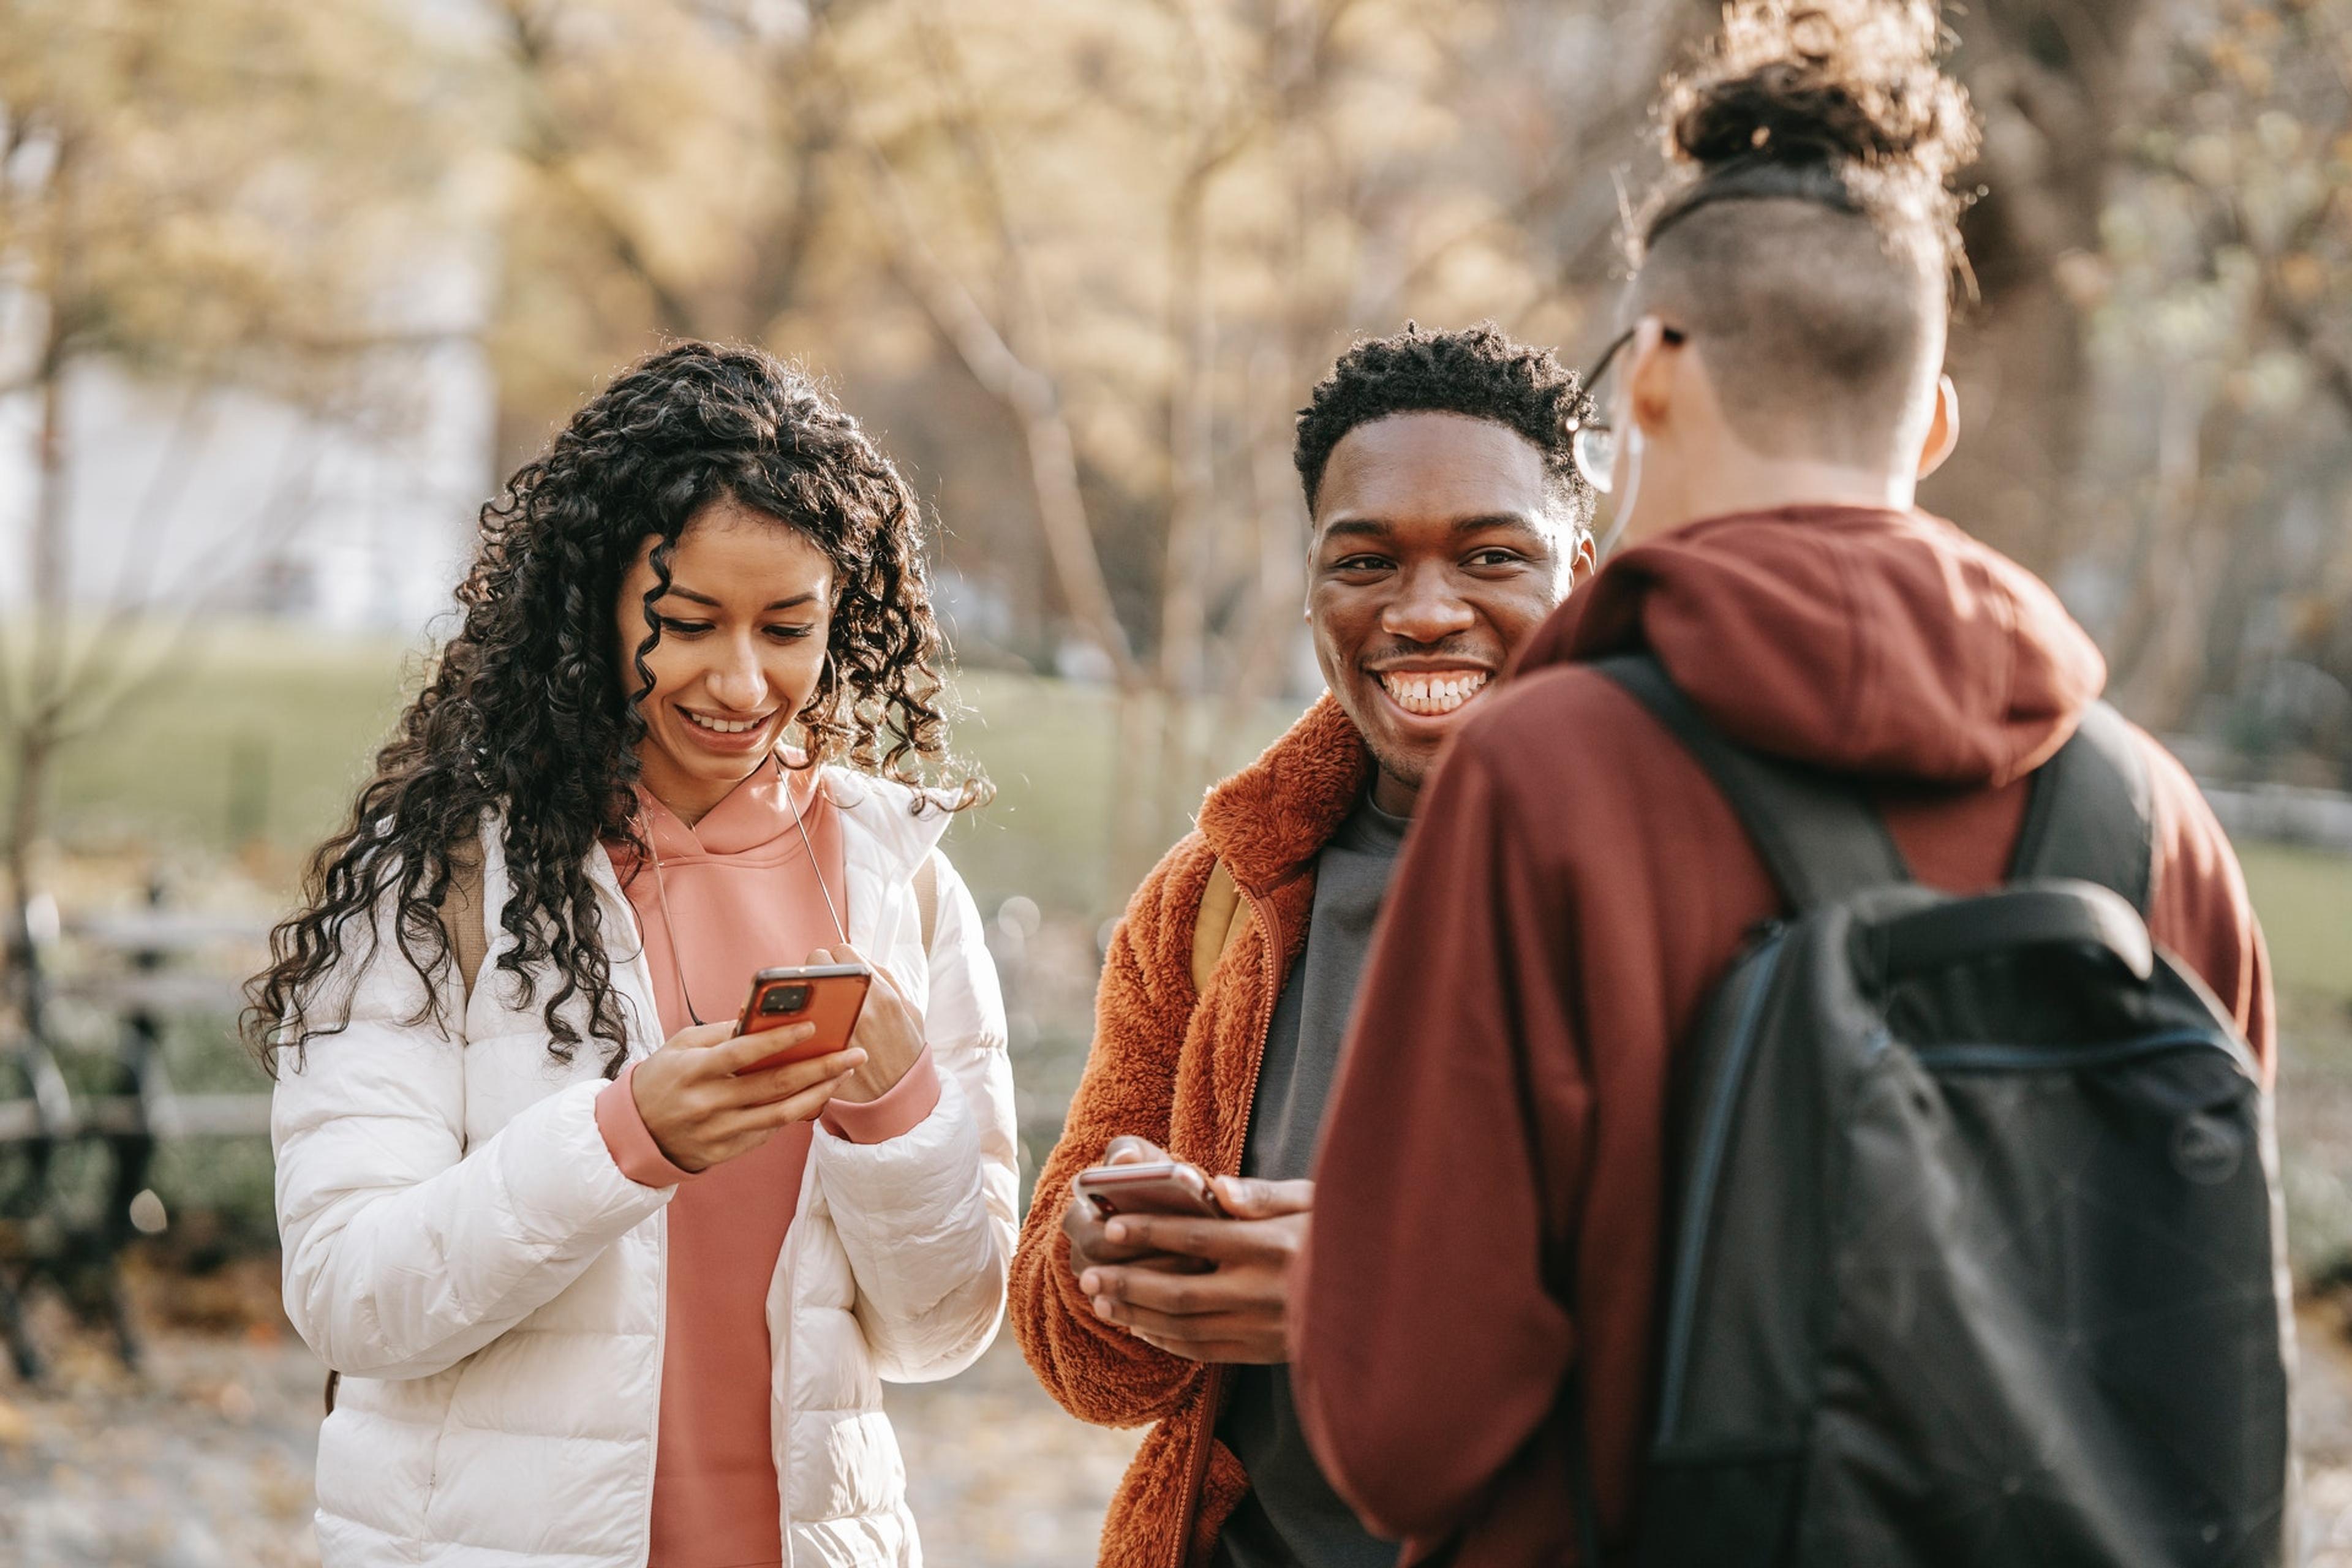 A group of three young adults stand together on a college campus holding their phones and smiling